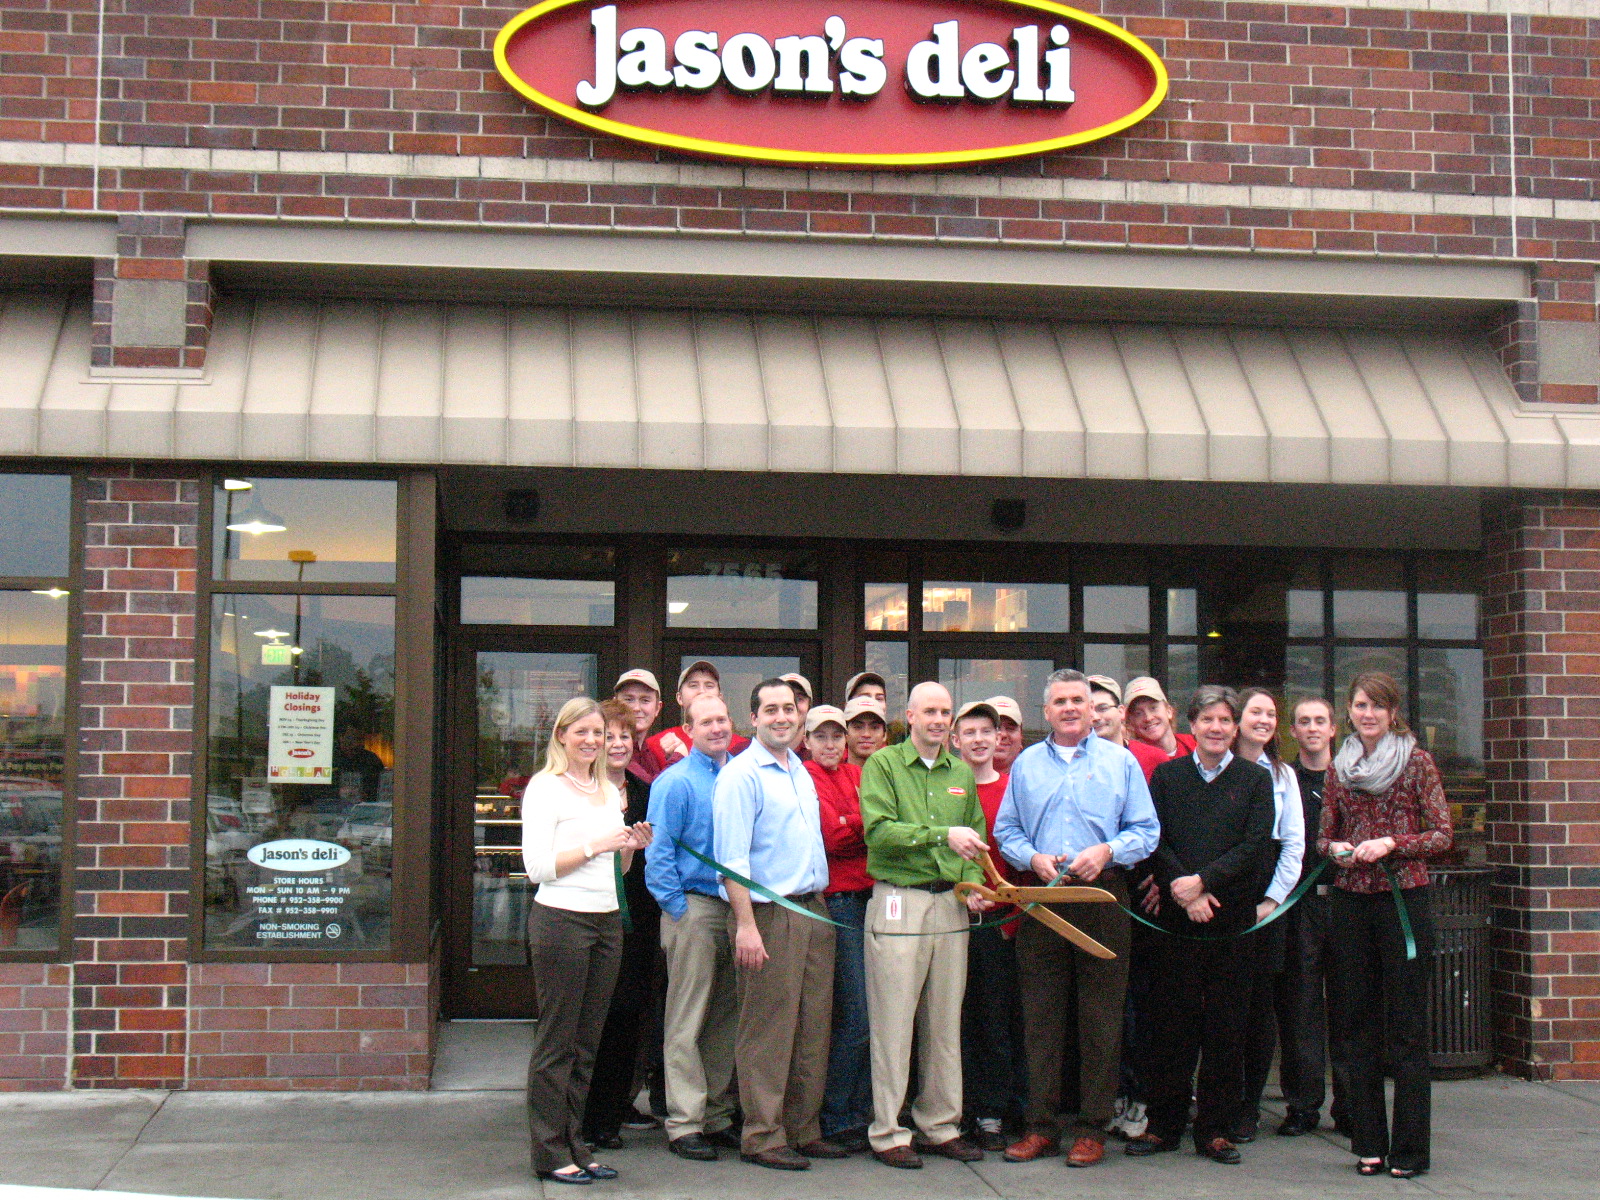 What are some of the options available on the Jason's Deli catering menu?